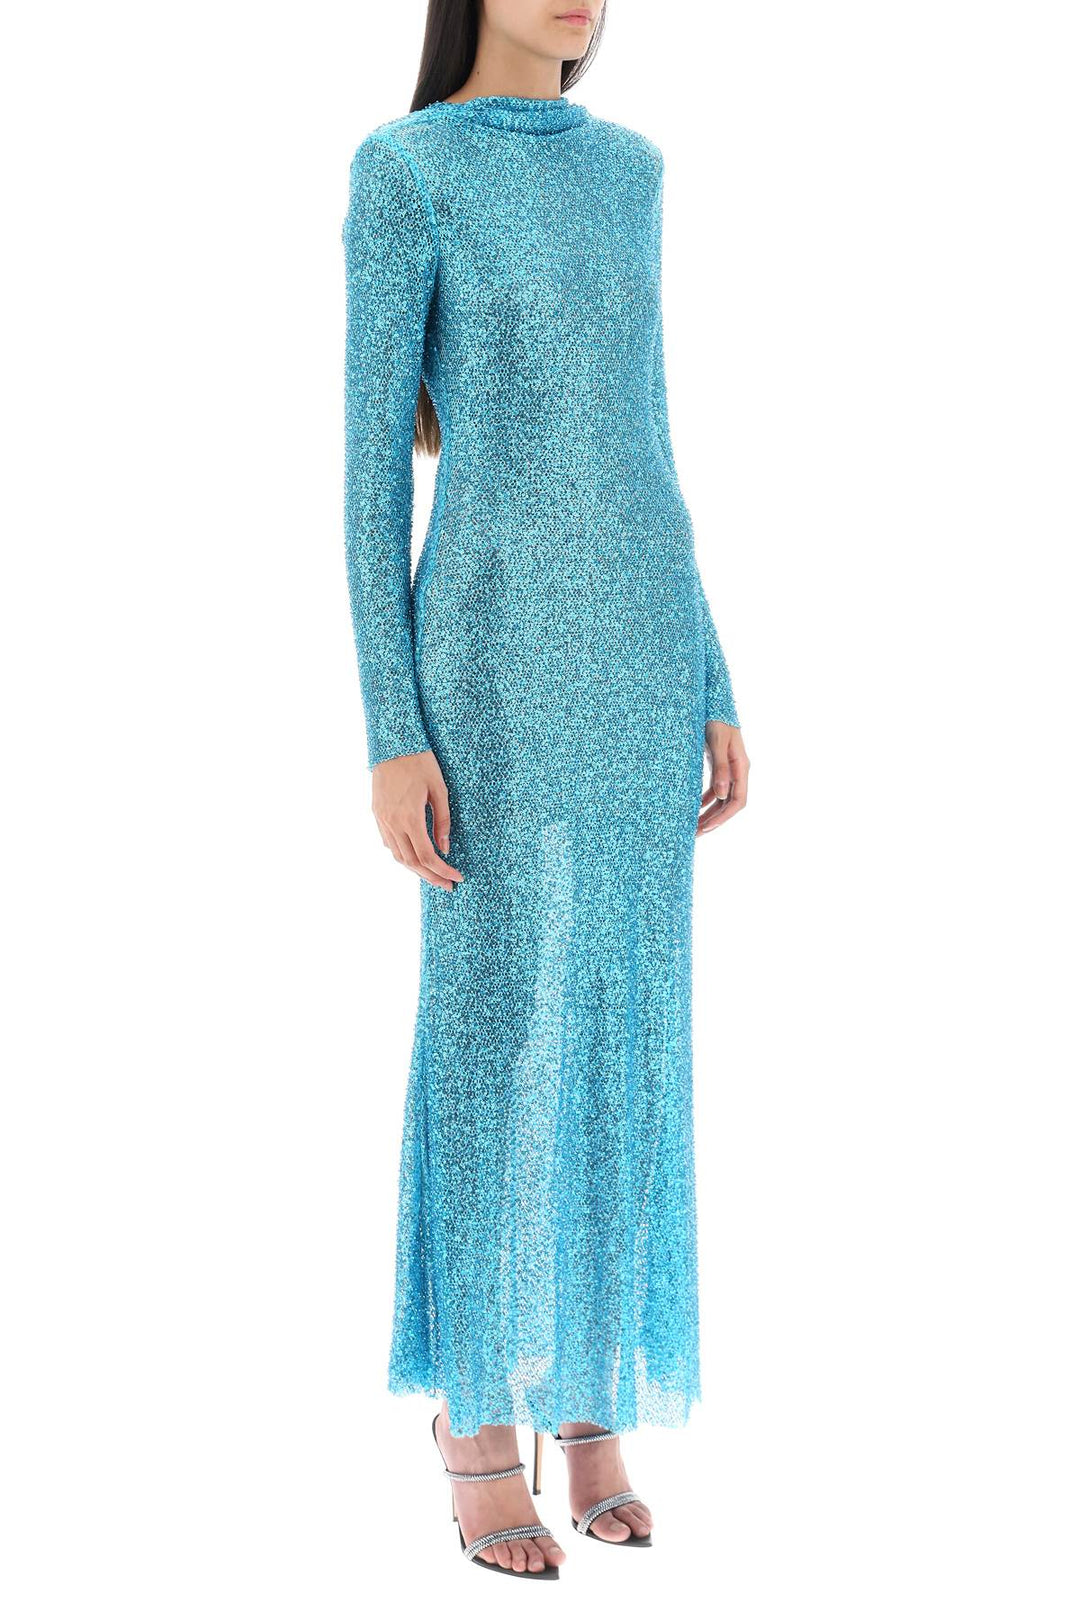 Self Portrait Long Sleeved Maxi Dress With Sequins And Beads   Light Blue